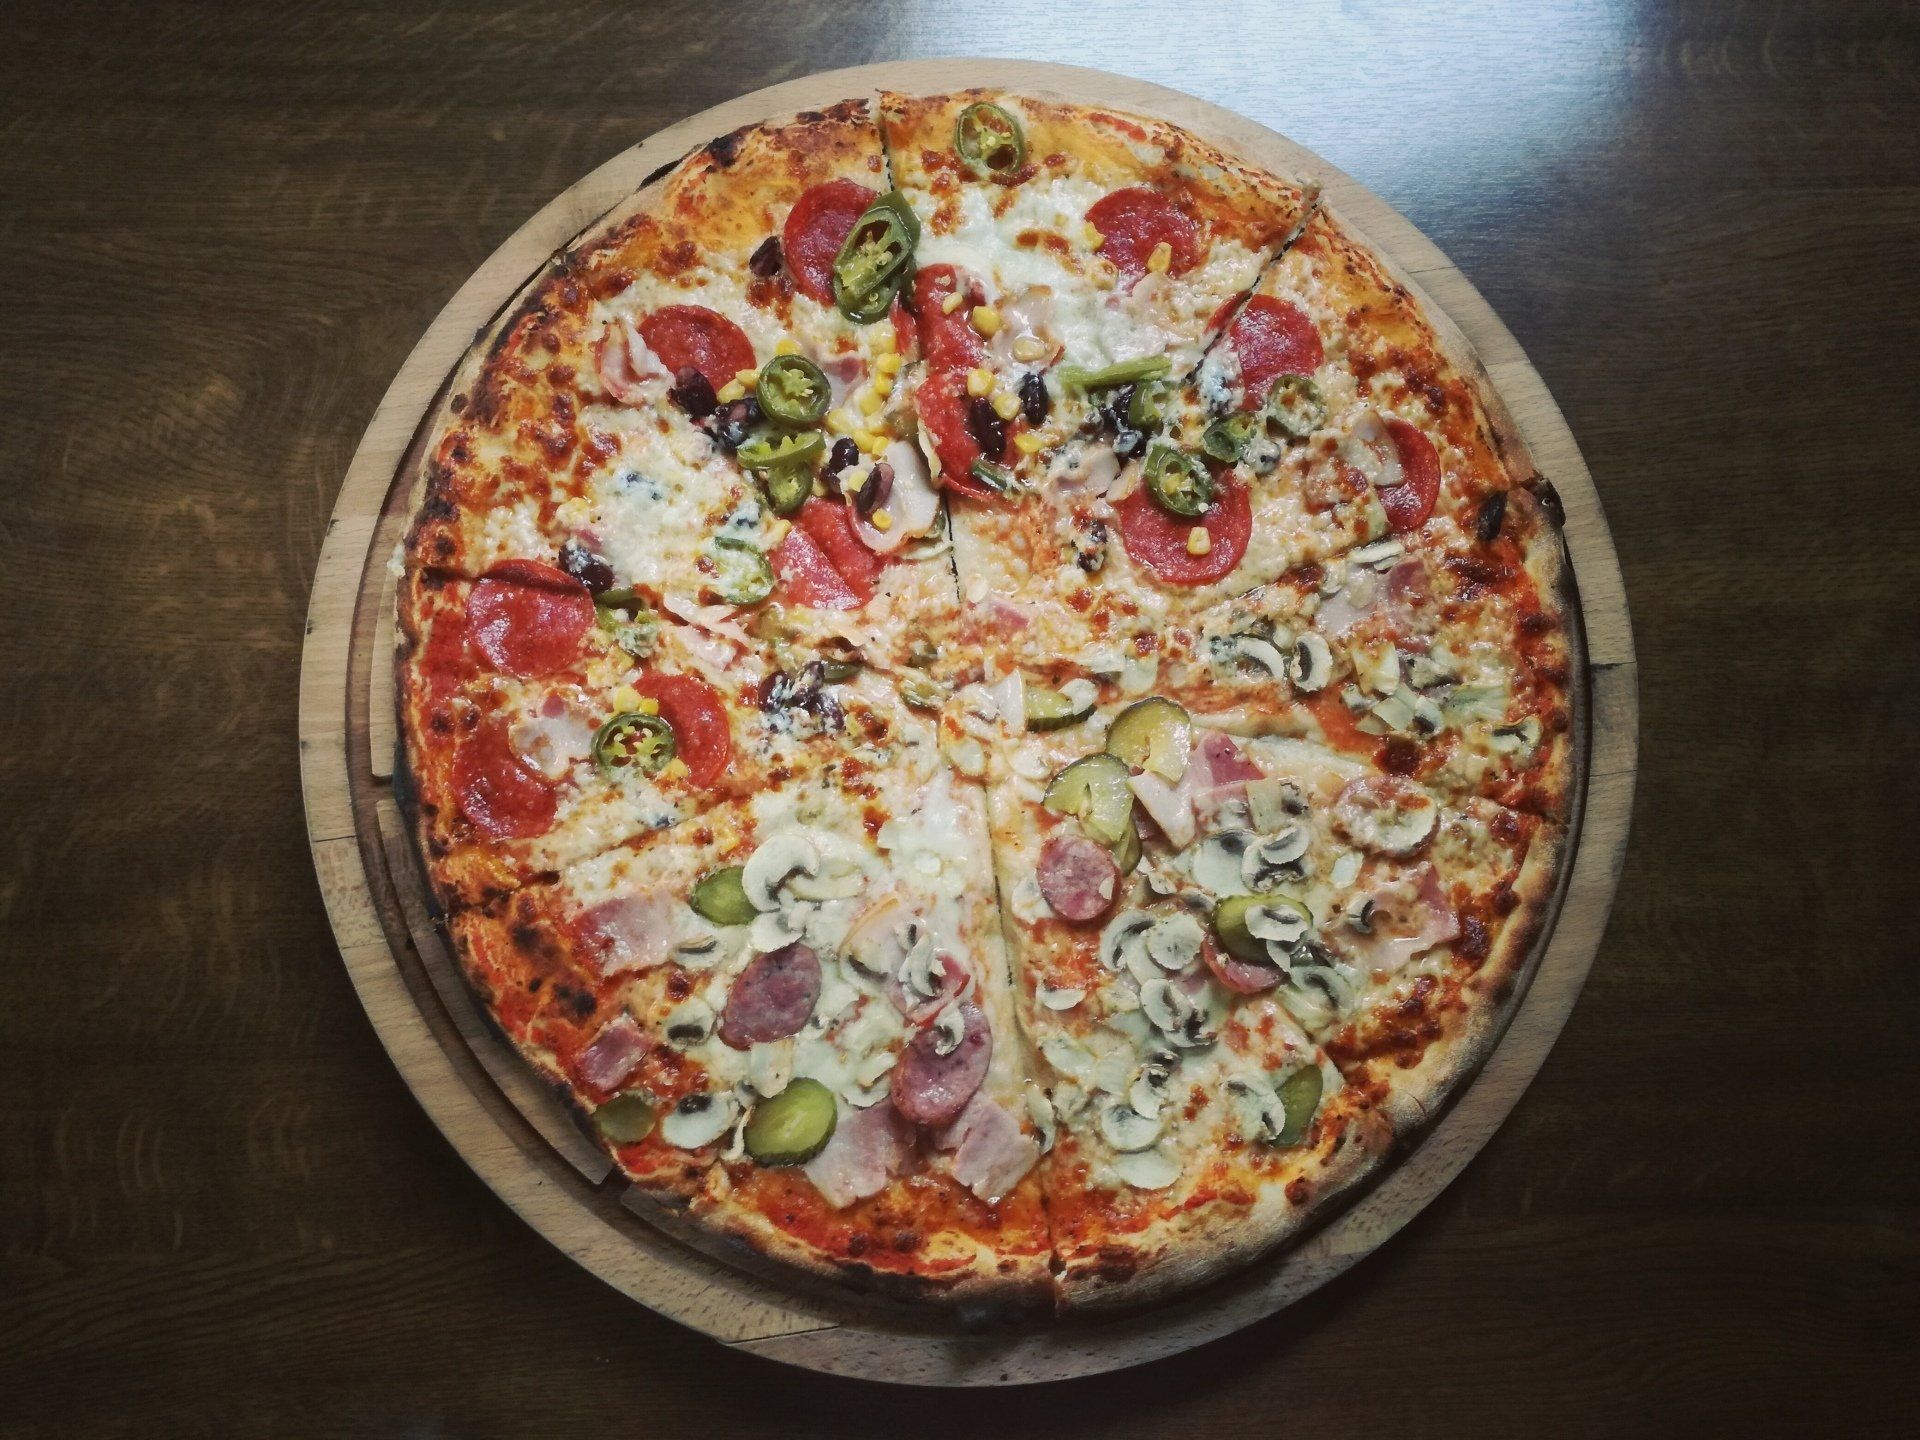 A pizza is sitting on a wooden cutting board on a wooden table.